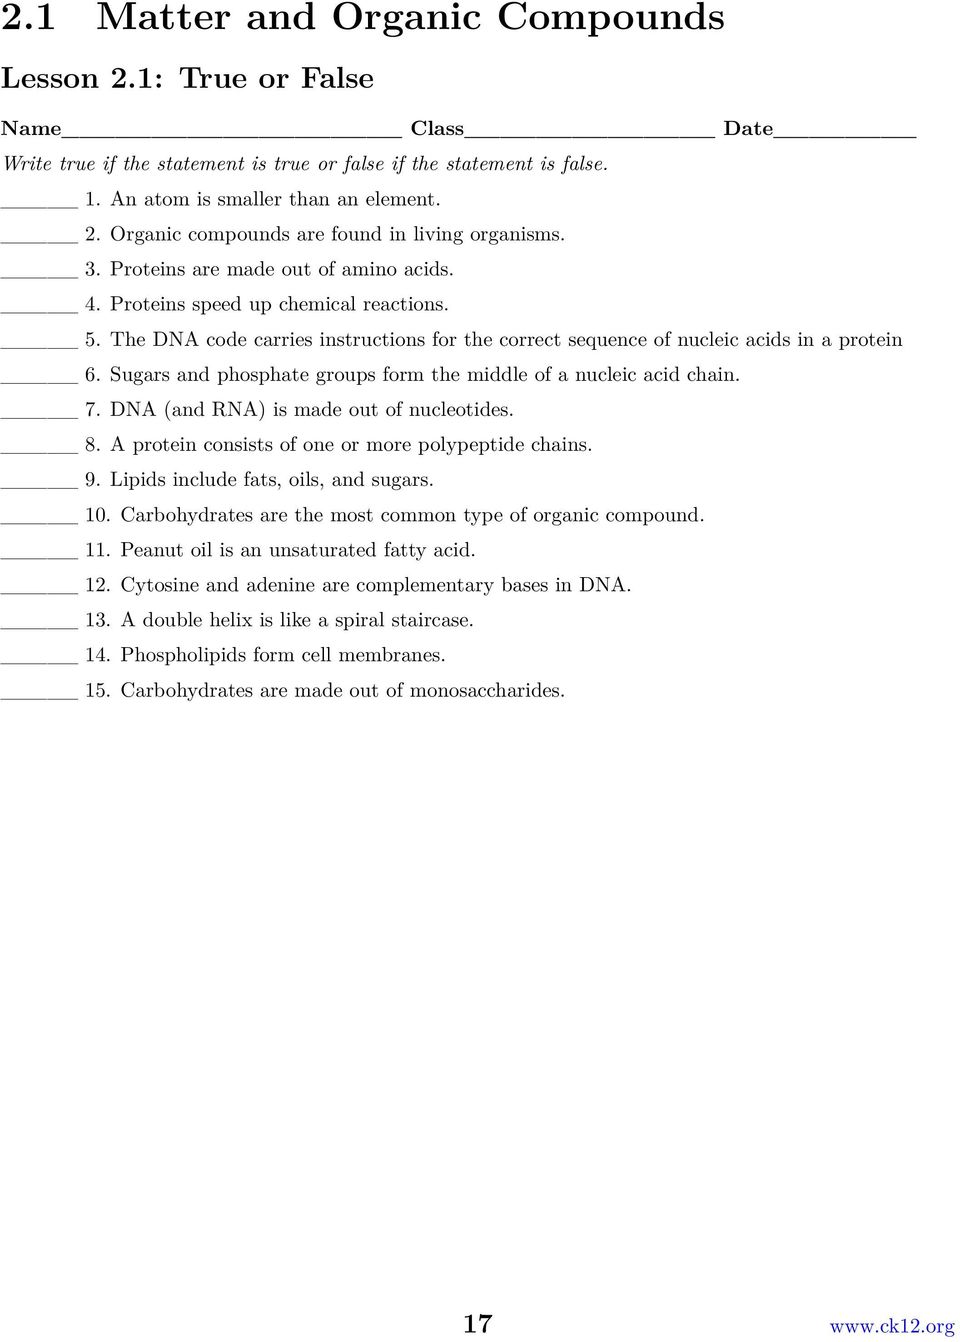 Chapter 11. The Chemistry of Life Worksheets - PDF Free Download For Chemistry Of Life Worksheet